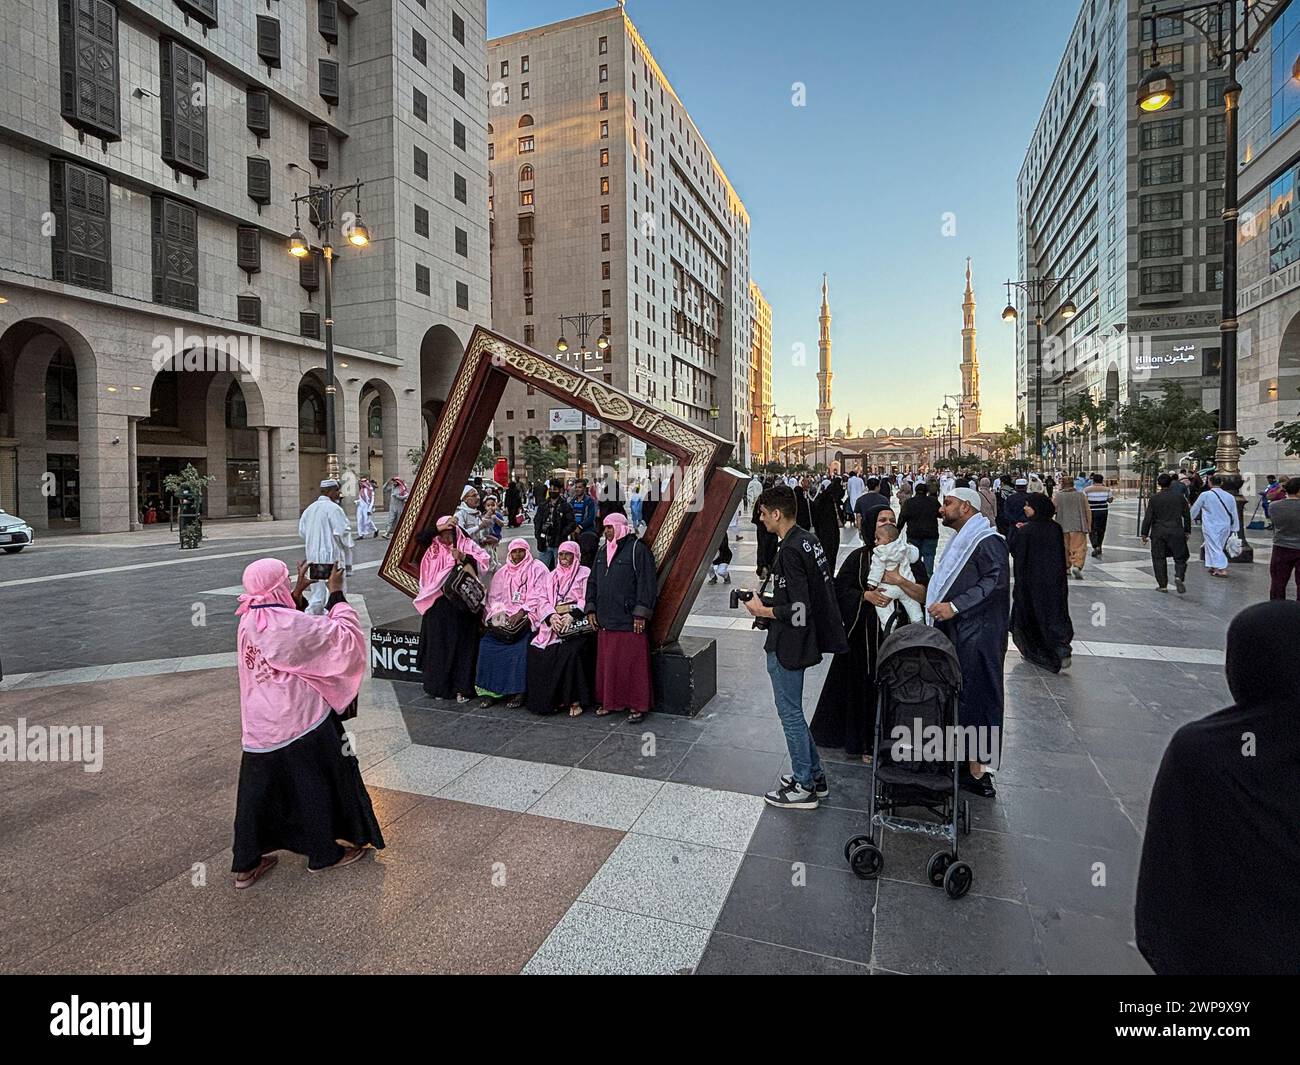 Saudia Arabia, Madinah, 2024-02-12. Daily life in Saudi Arabia. Since 2019, the Kingdom has been actively preparing for the post-oil era and opening up to foreign visitors, especially non-Muslim tourists. Photograph by Fred MARIE / Collectif DR.  Arabie saoudite, Medine, 2024-02-12. Vie quotidienne en Arabie saoudite. Depuis 2019, le Royaume prepare activement l apres-petrole et s ouvre aux visiteurs etrangers, notamment aux touristes non-musulmans. Photographie de Fred MARIE / Collectif DR Stock Photo